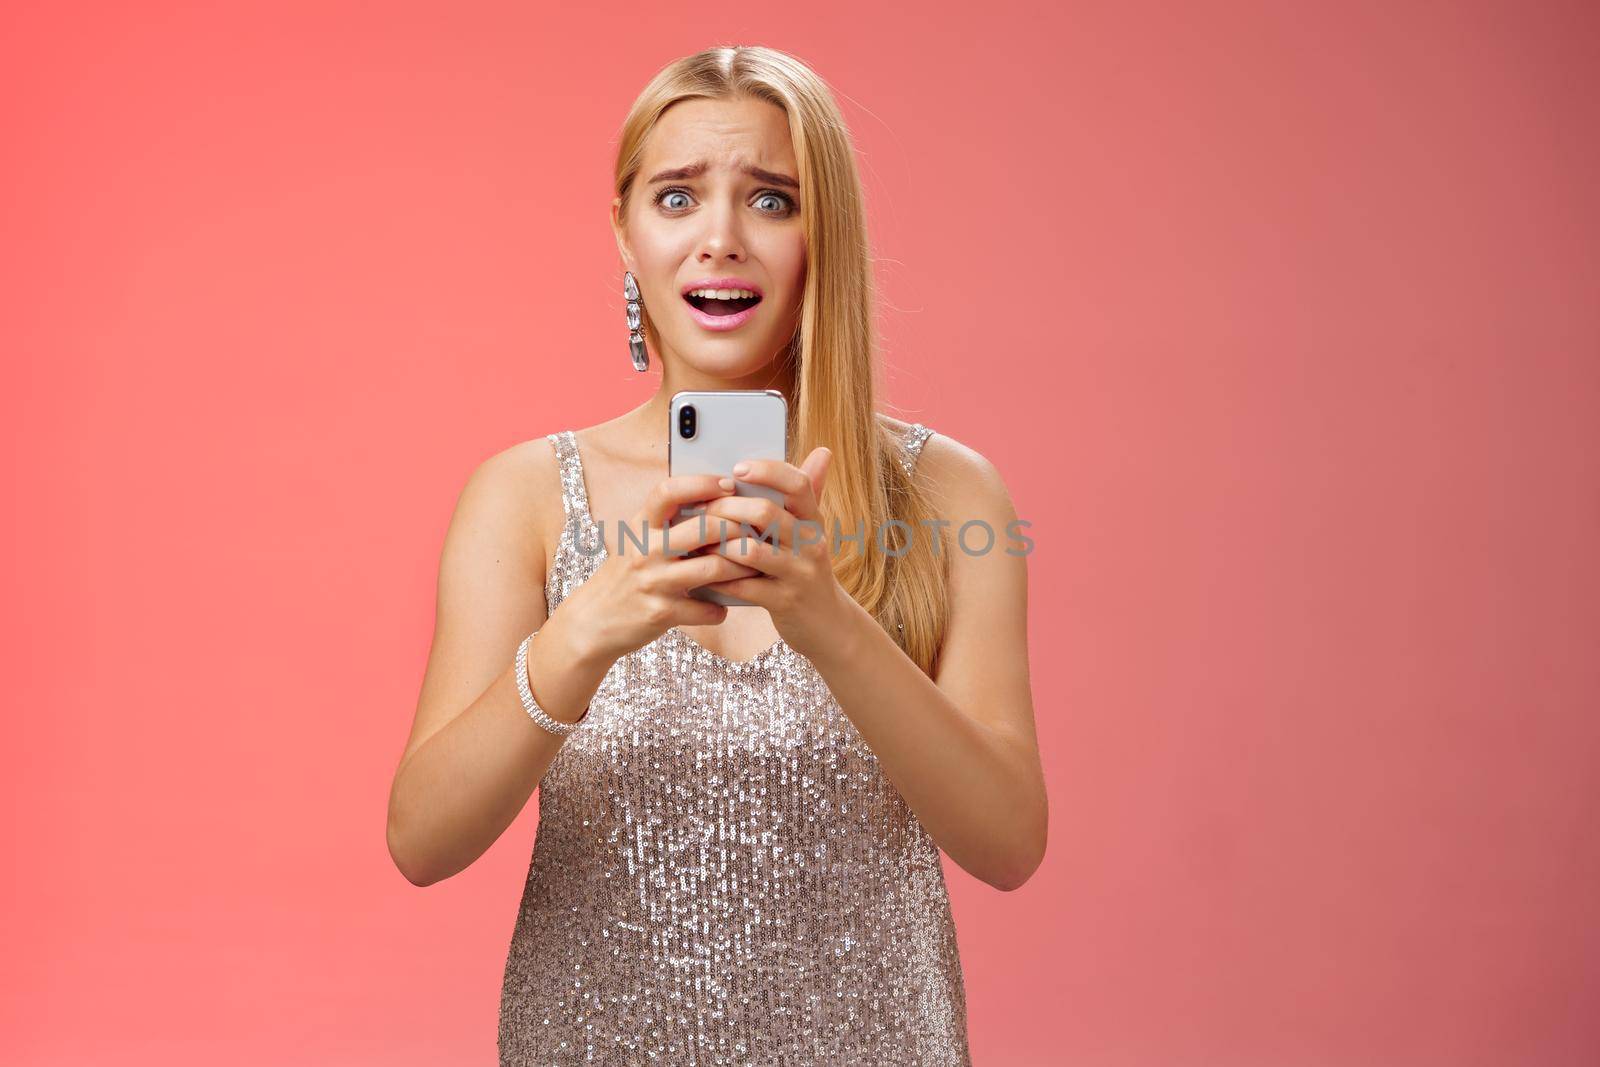 Panicking shocked woman concerned photos leaked internet look afraid anxious widen eyes cringing troubled hold smartphone shook speechless gasping terrified friends find out secret, red background by Benzoix